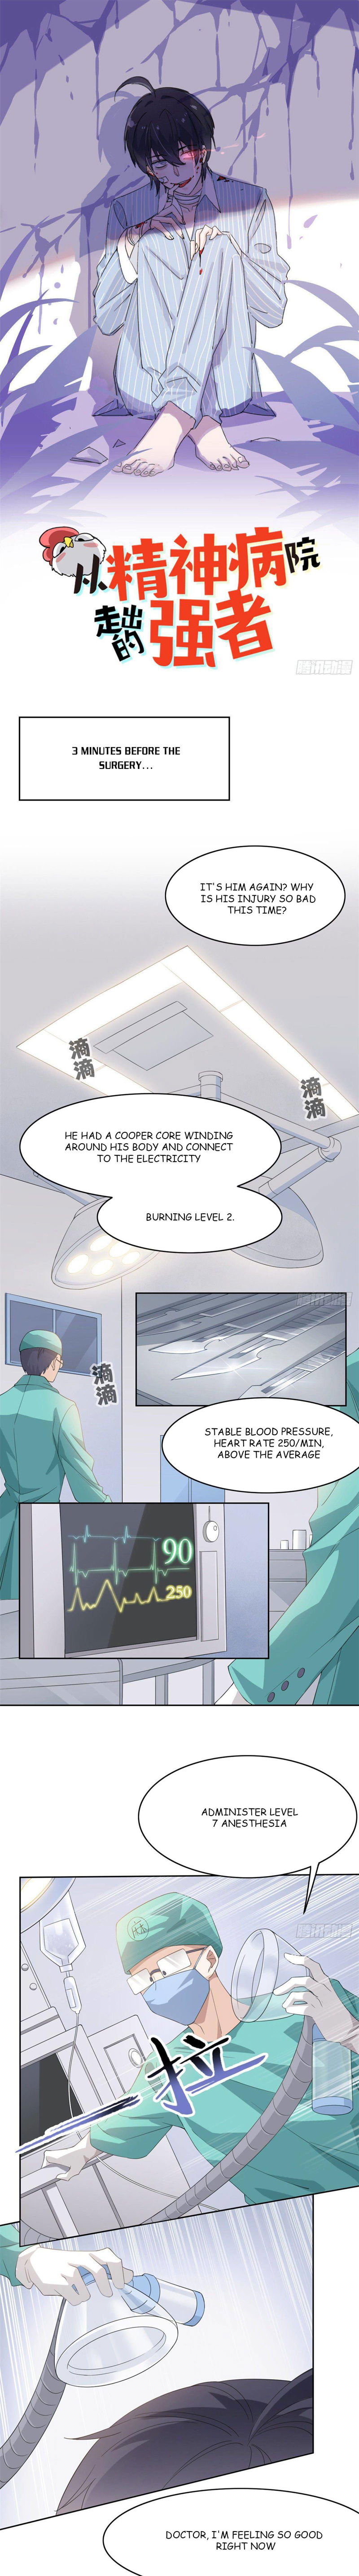 The Strong Man From The Mental Hospital Chapter 2 page 1